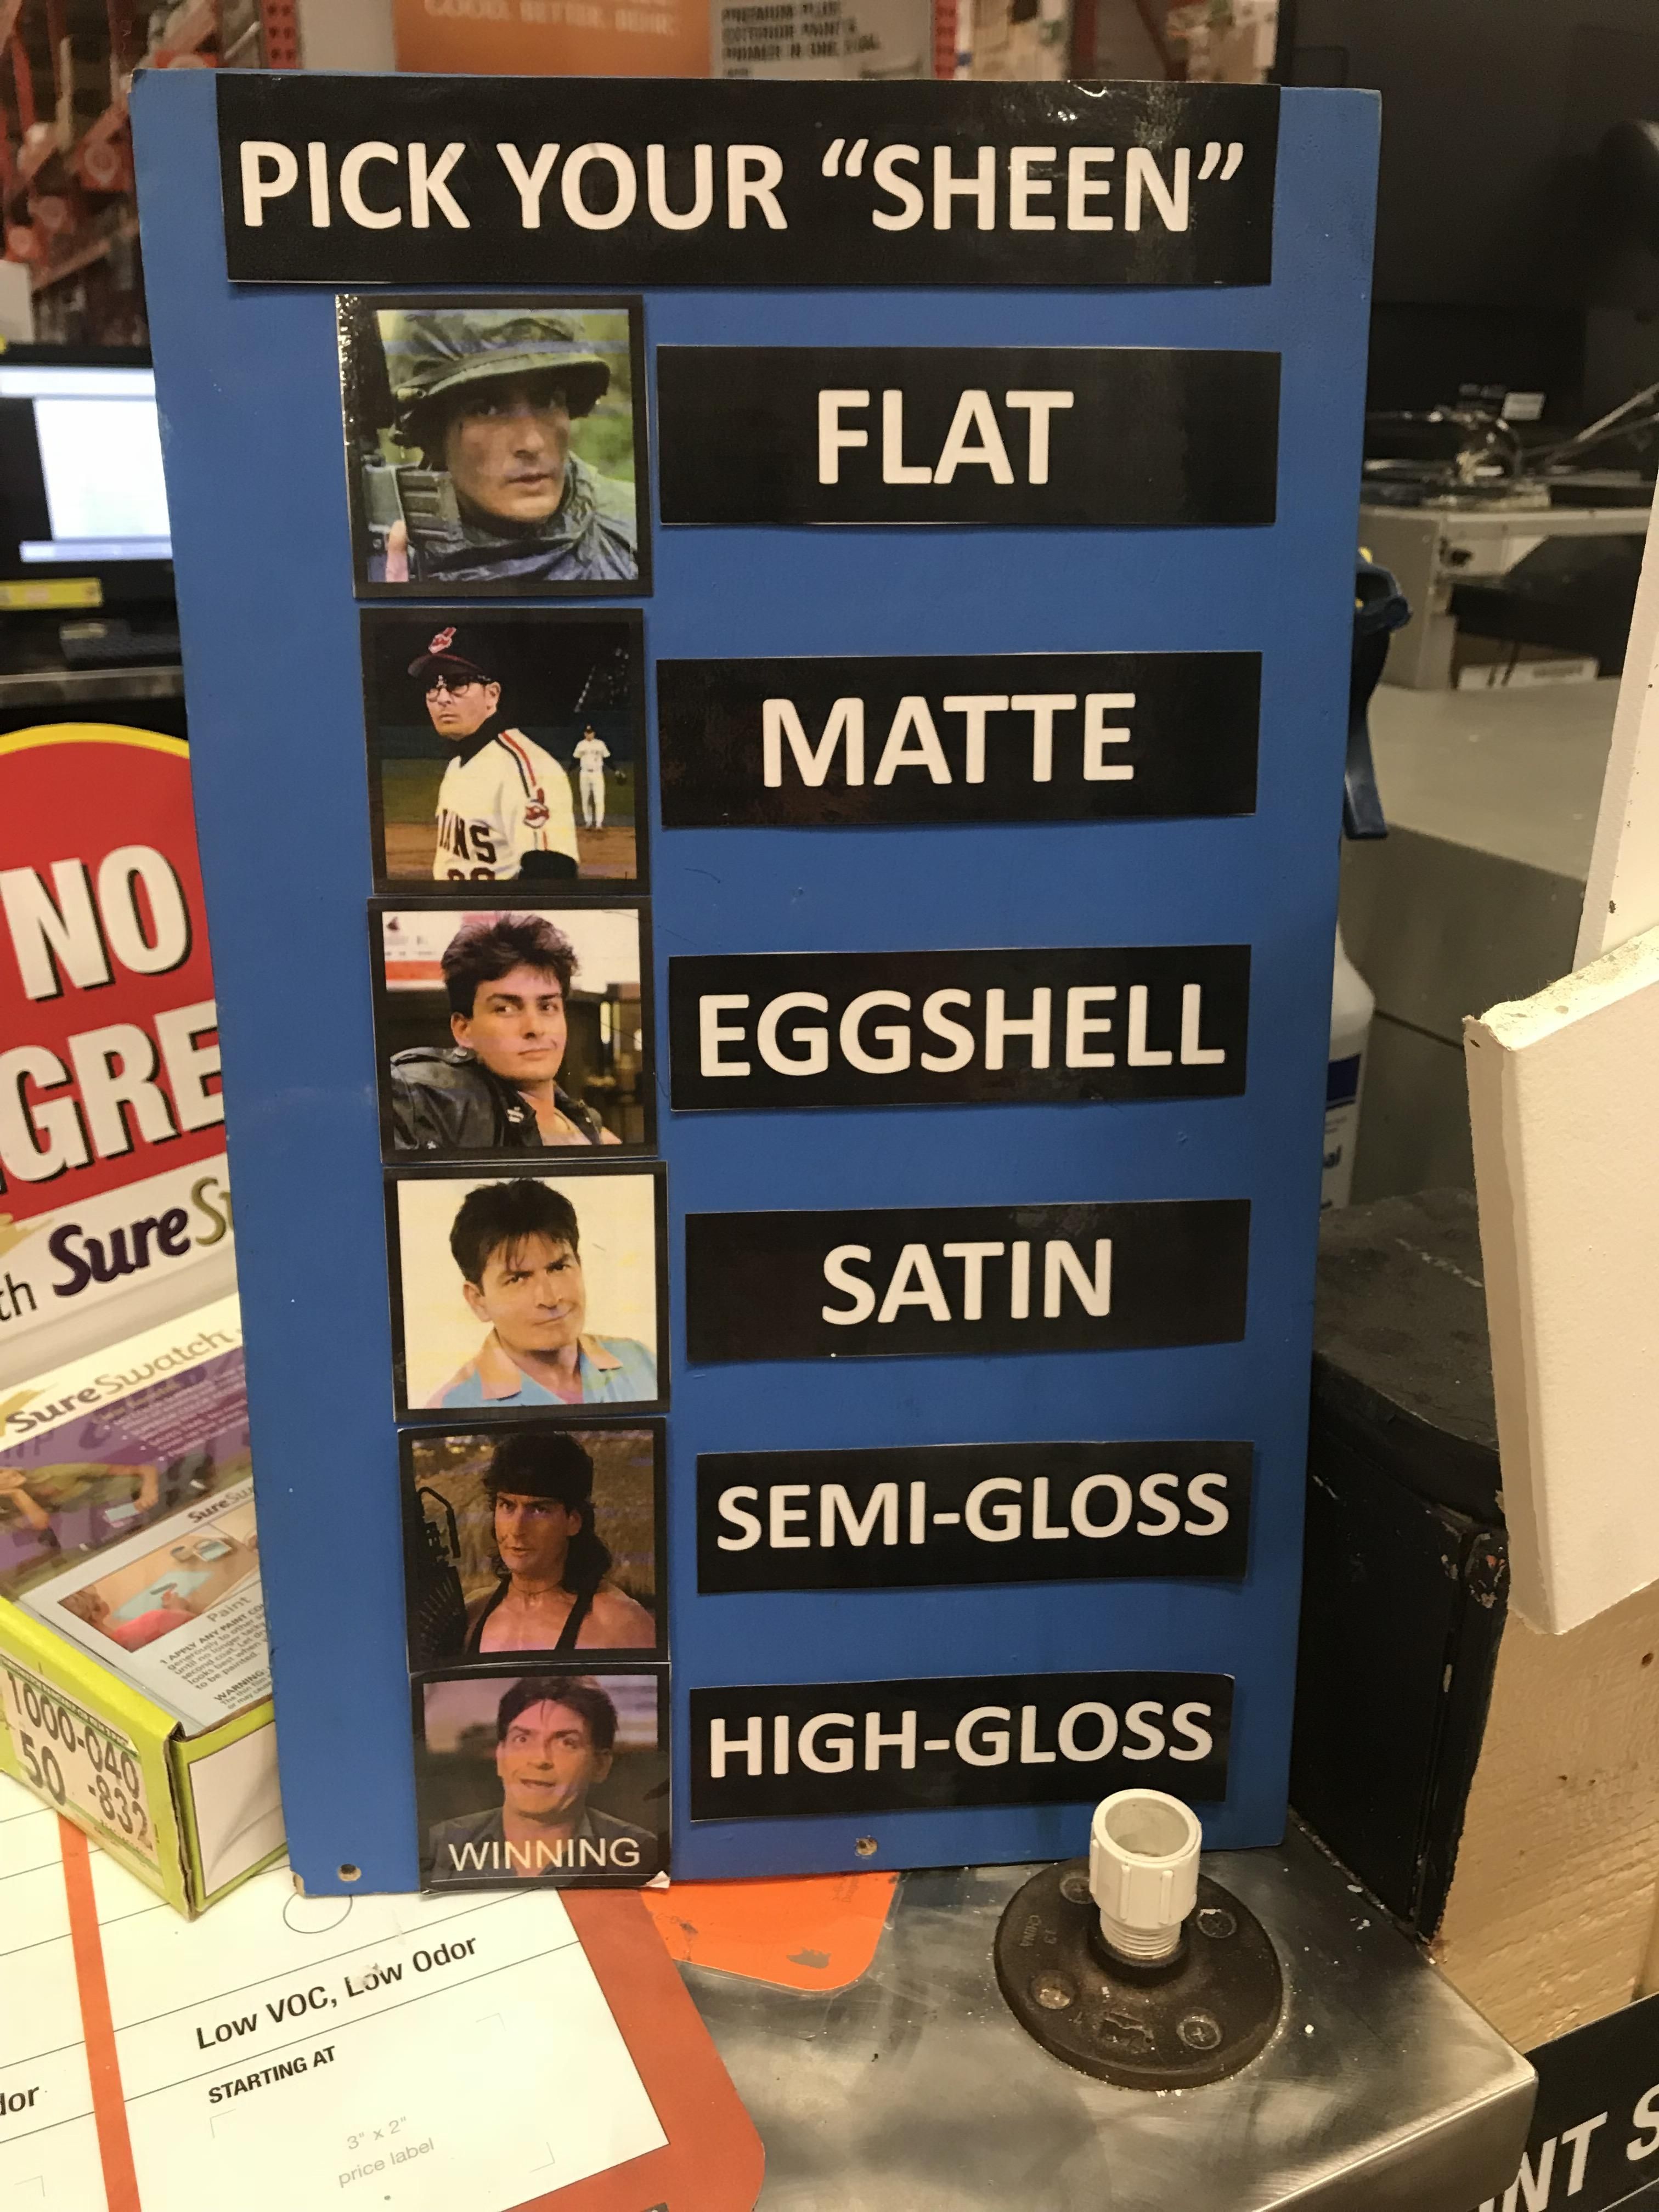 Pick your “Sheen” sign at Home Depot